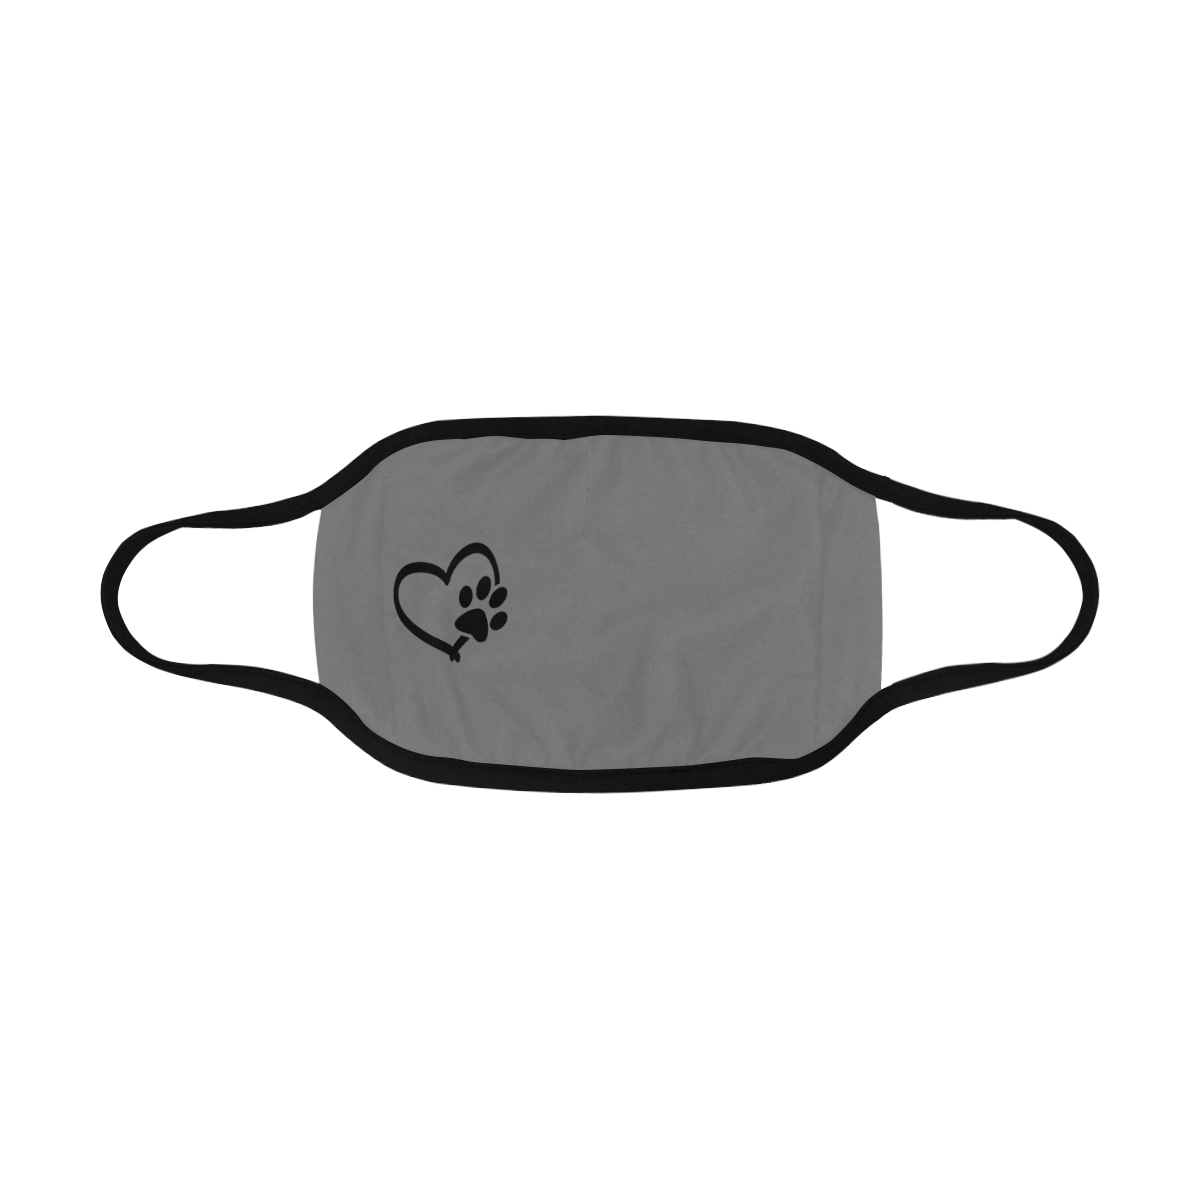 DOG LOVERS - Black Heart and Dog Paw shapes Mouth Mask